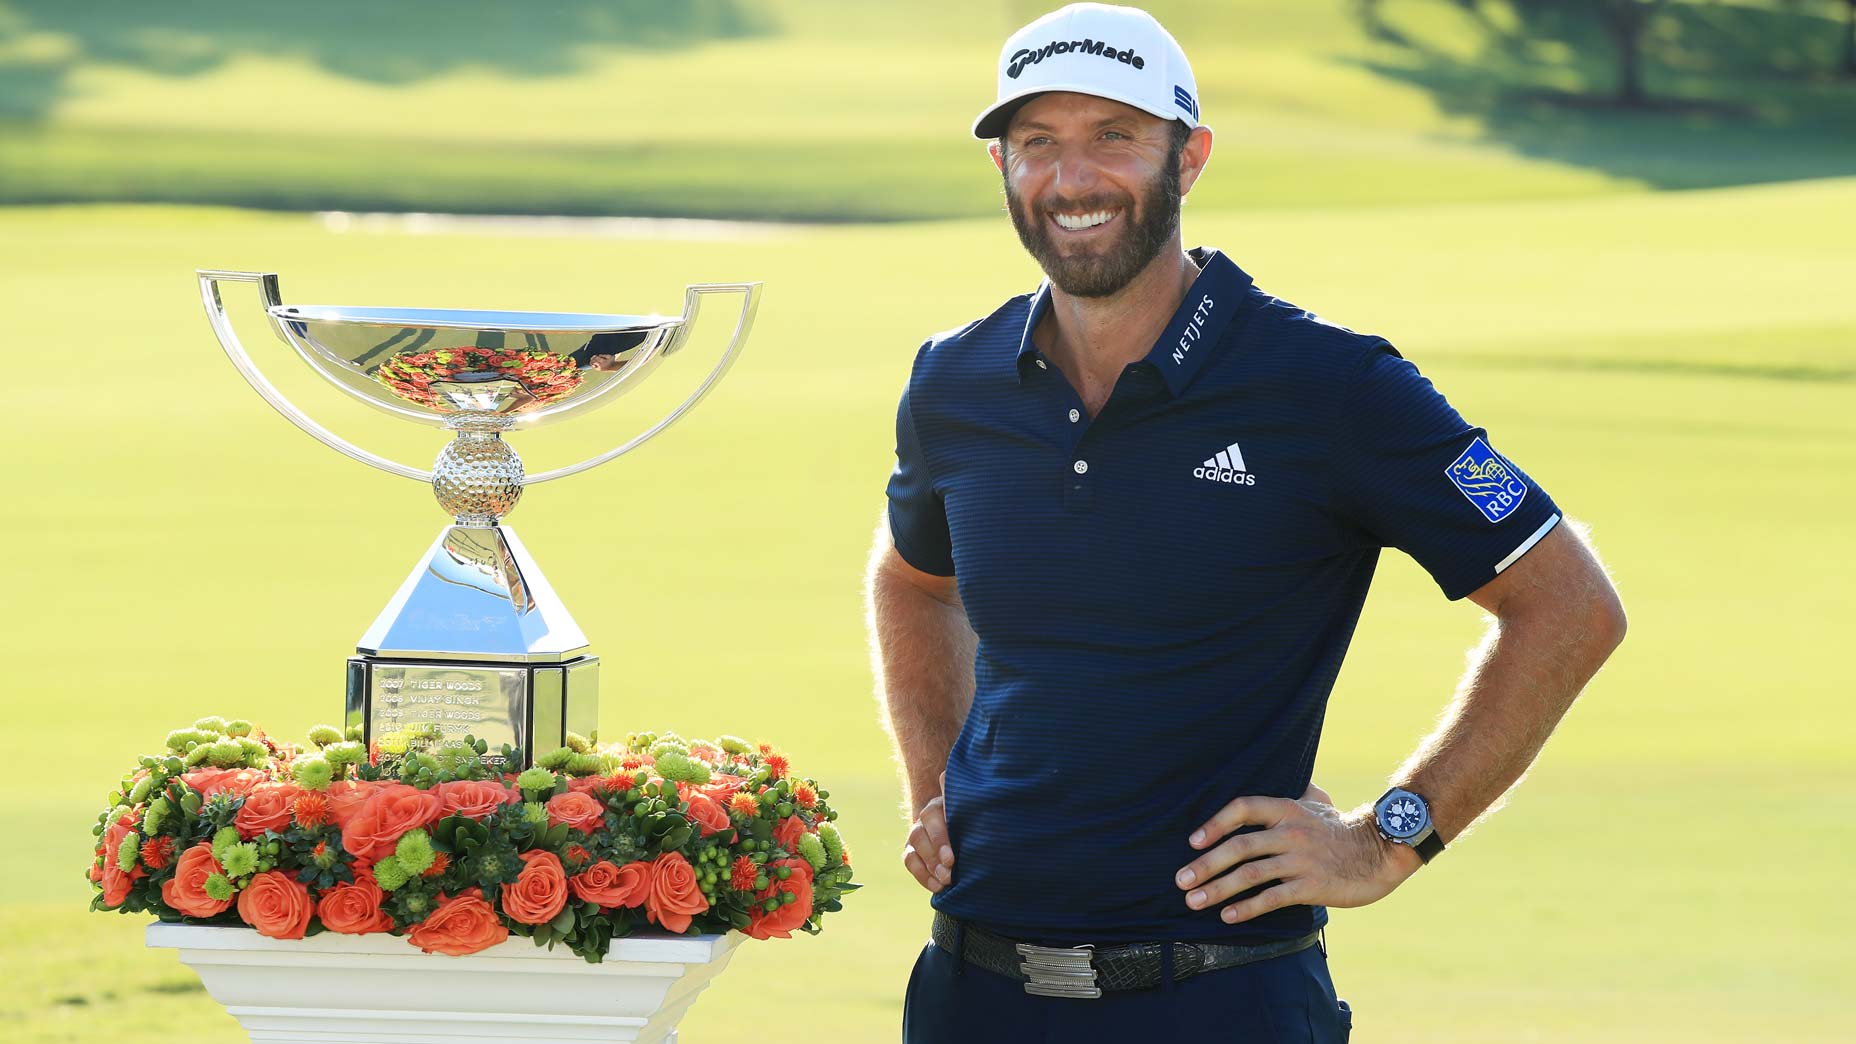 dustin johnson with trophy.